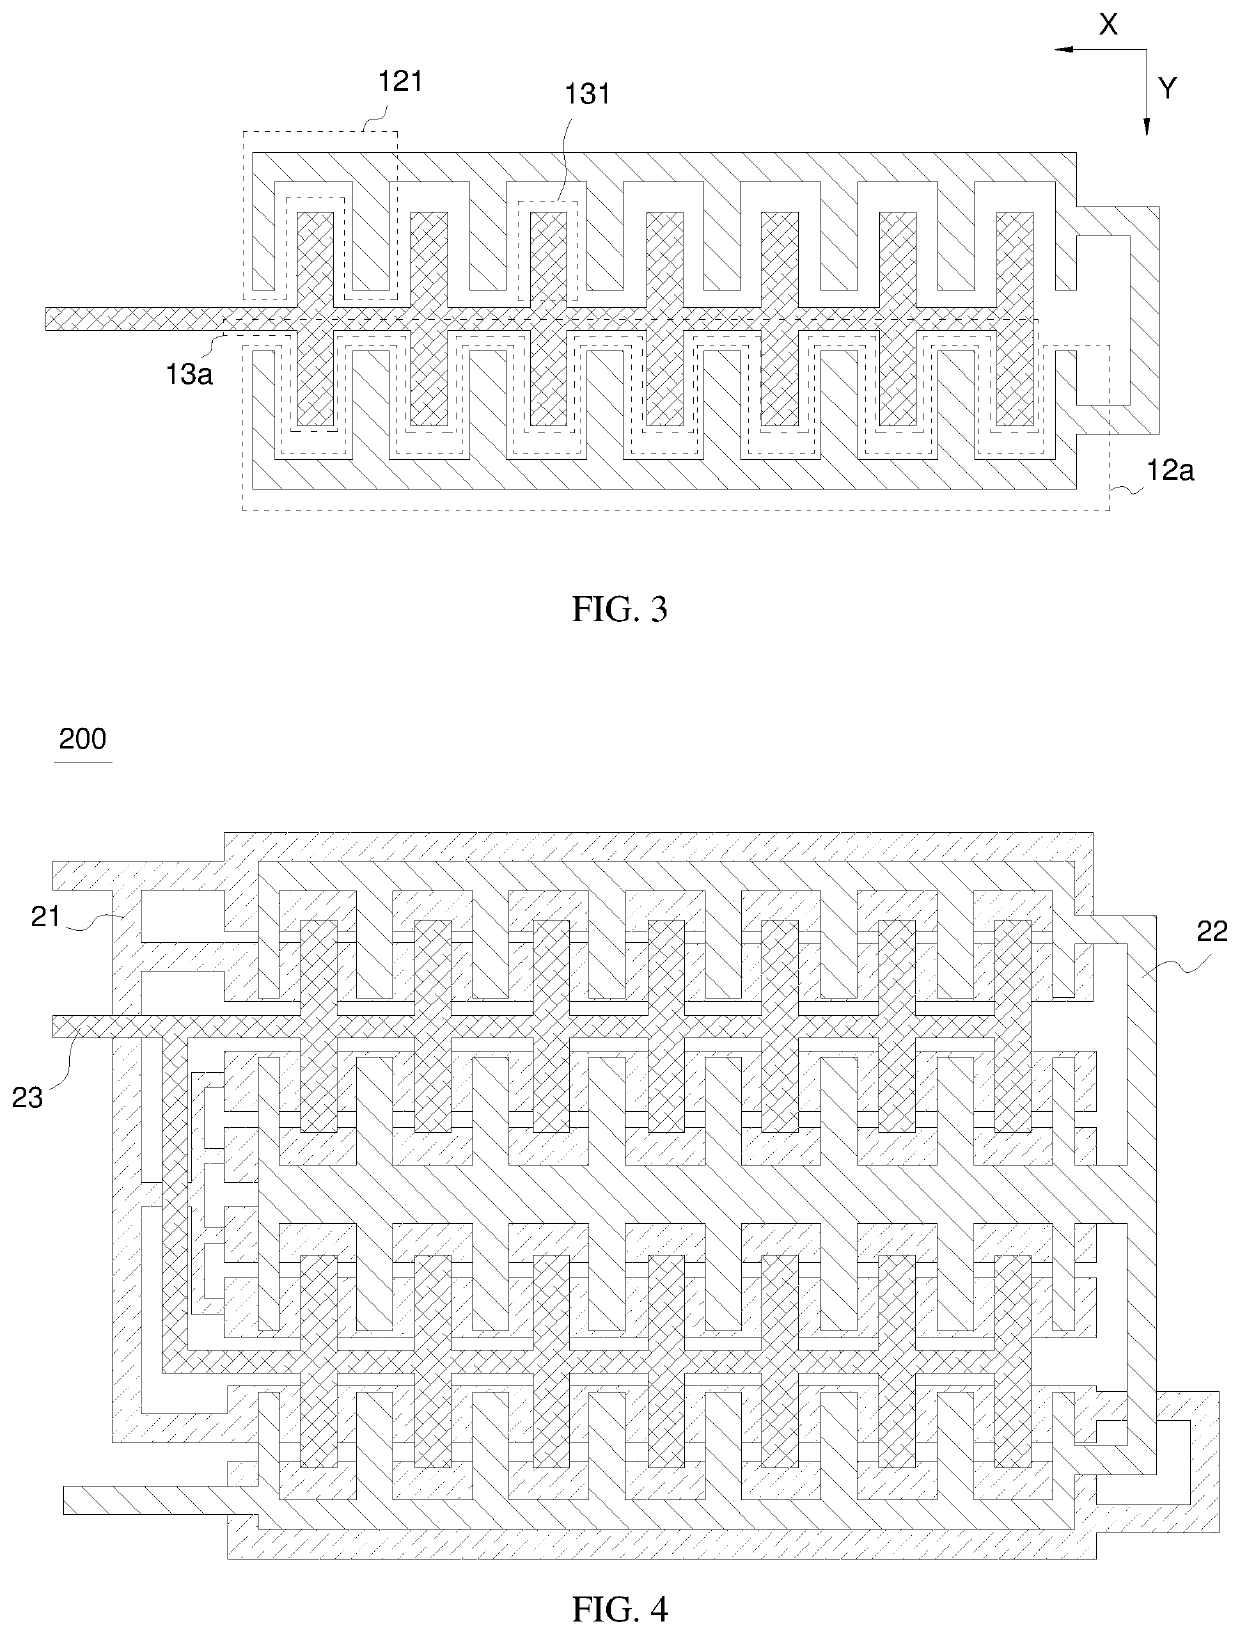 Thin film transistor and electrical circuit